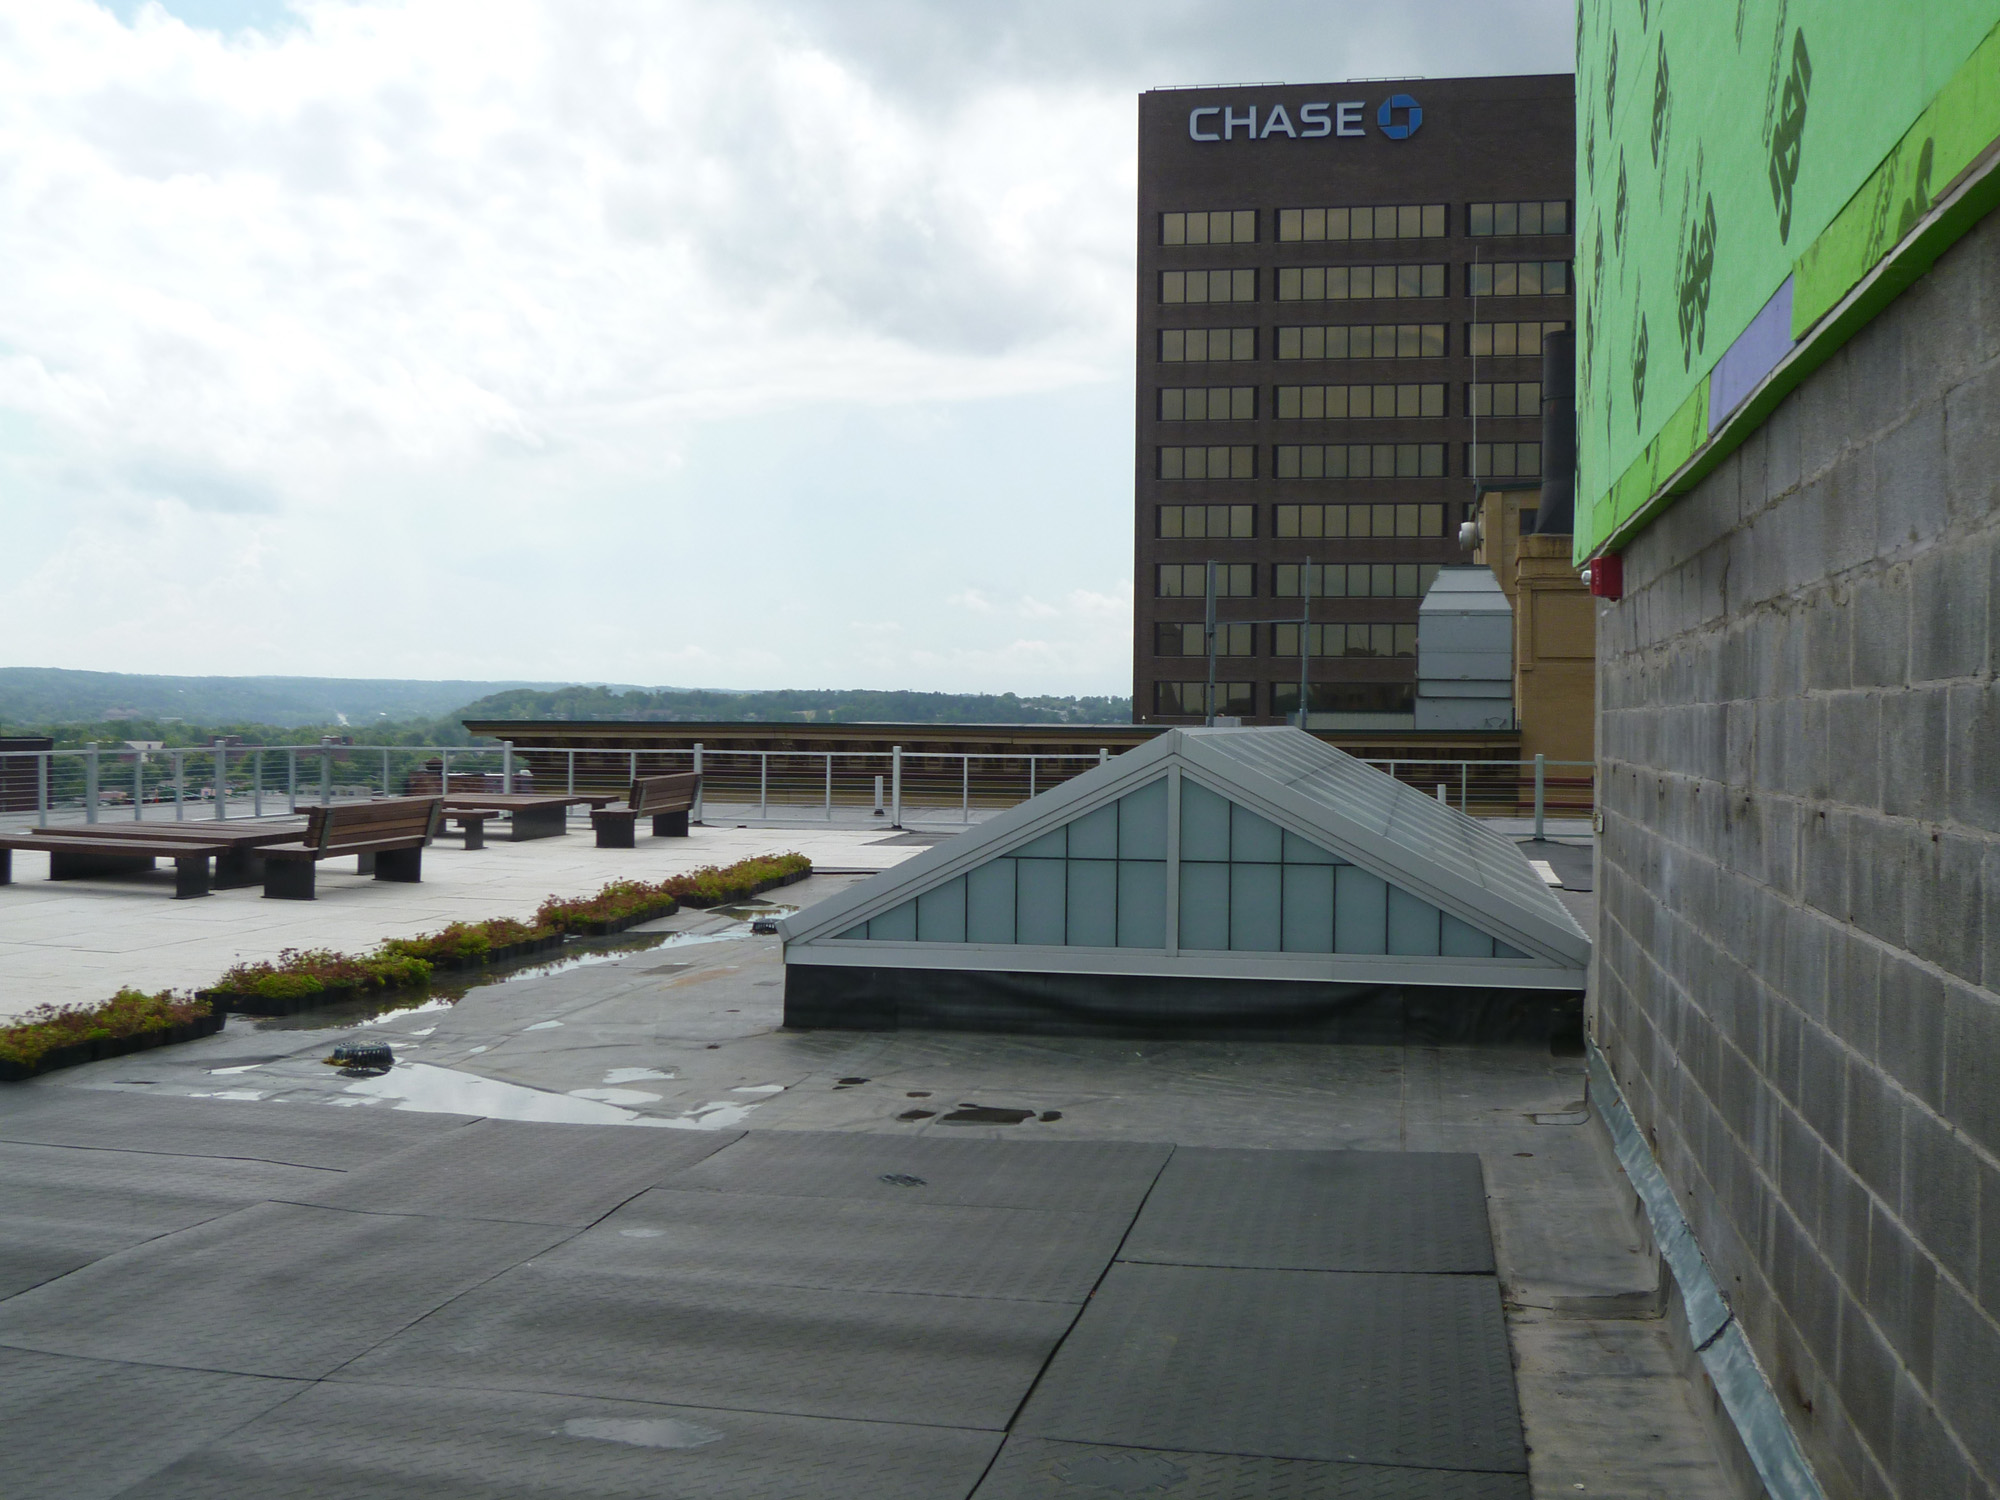 John P. Stopen Renovation Projects Merchant Commons Rooftop